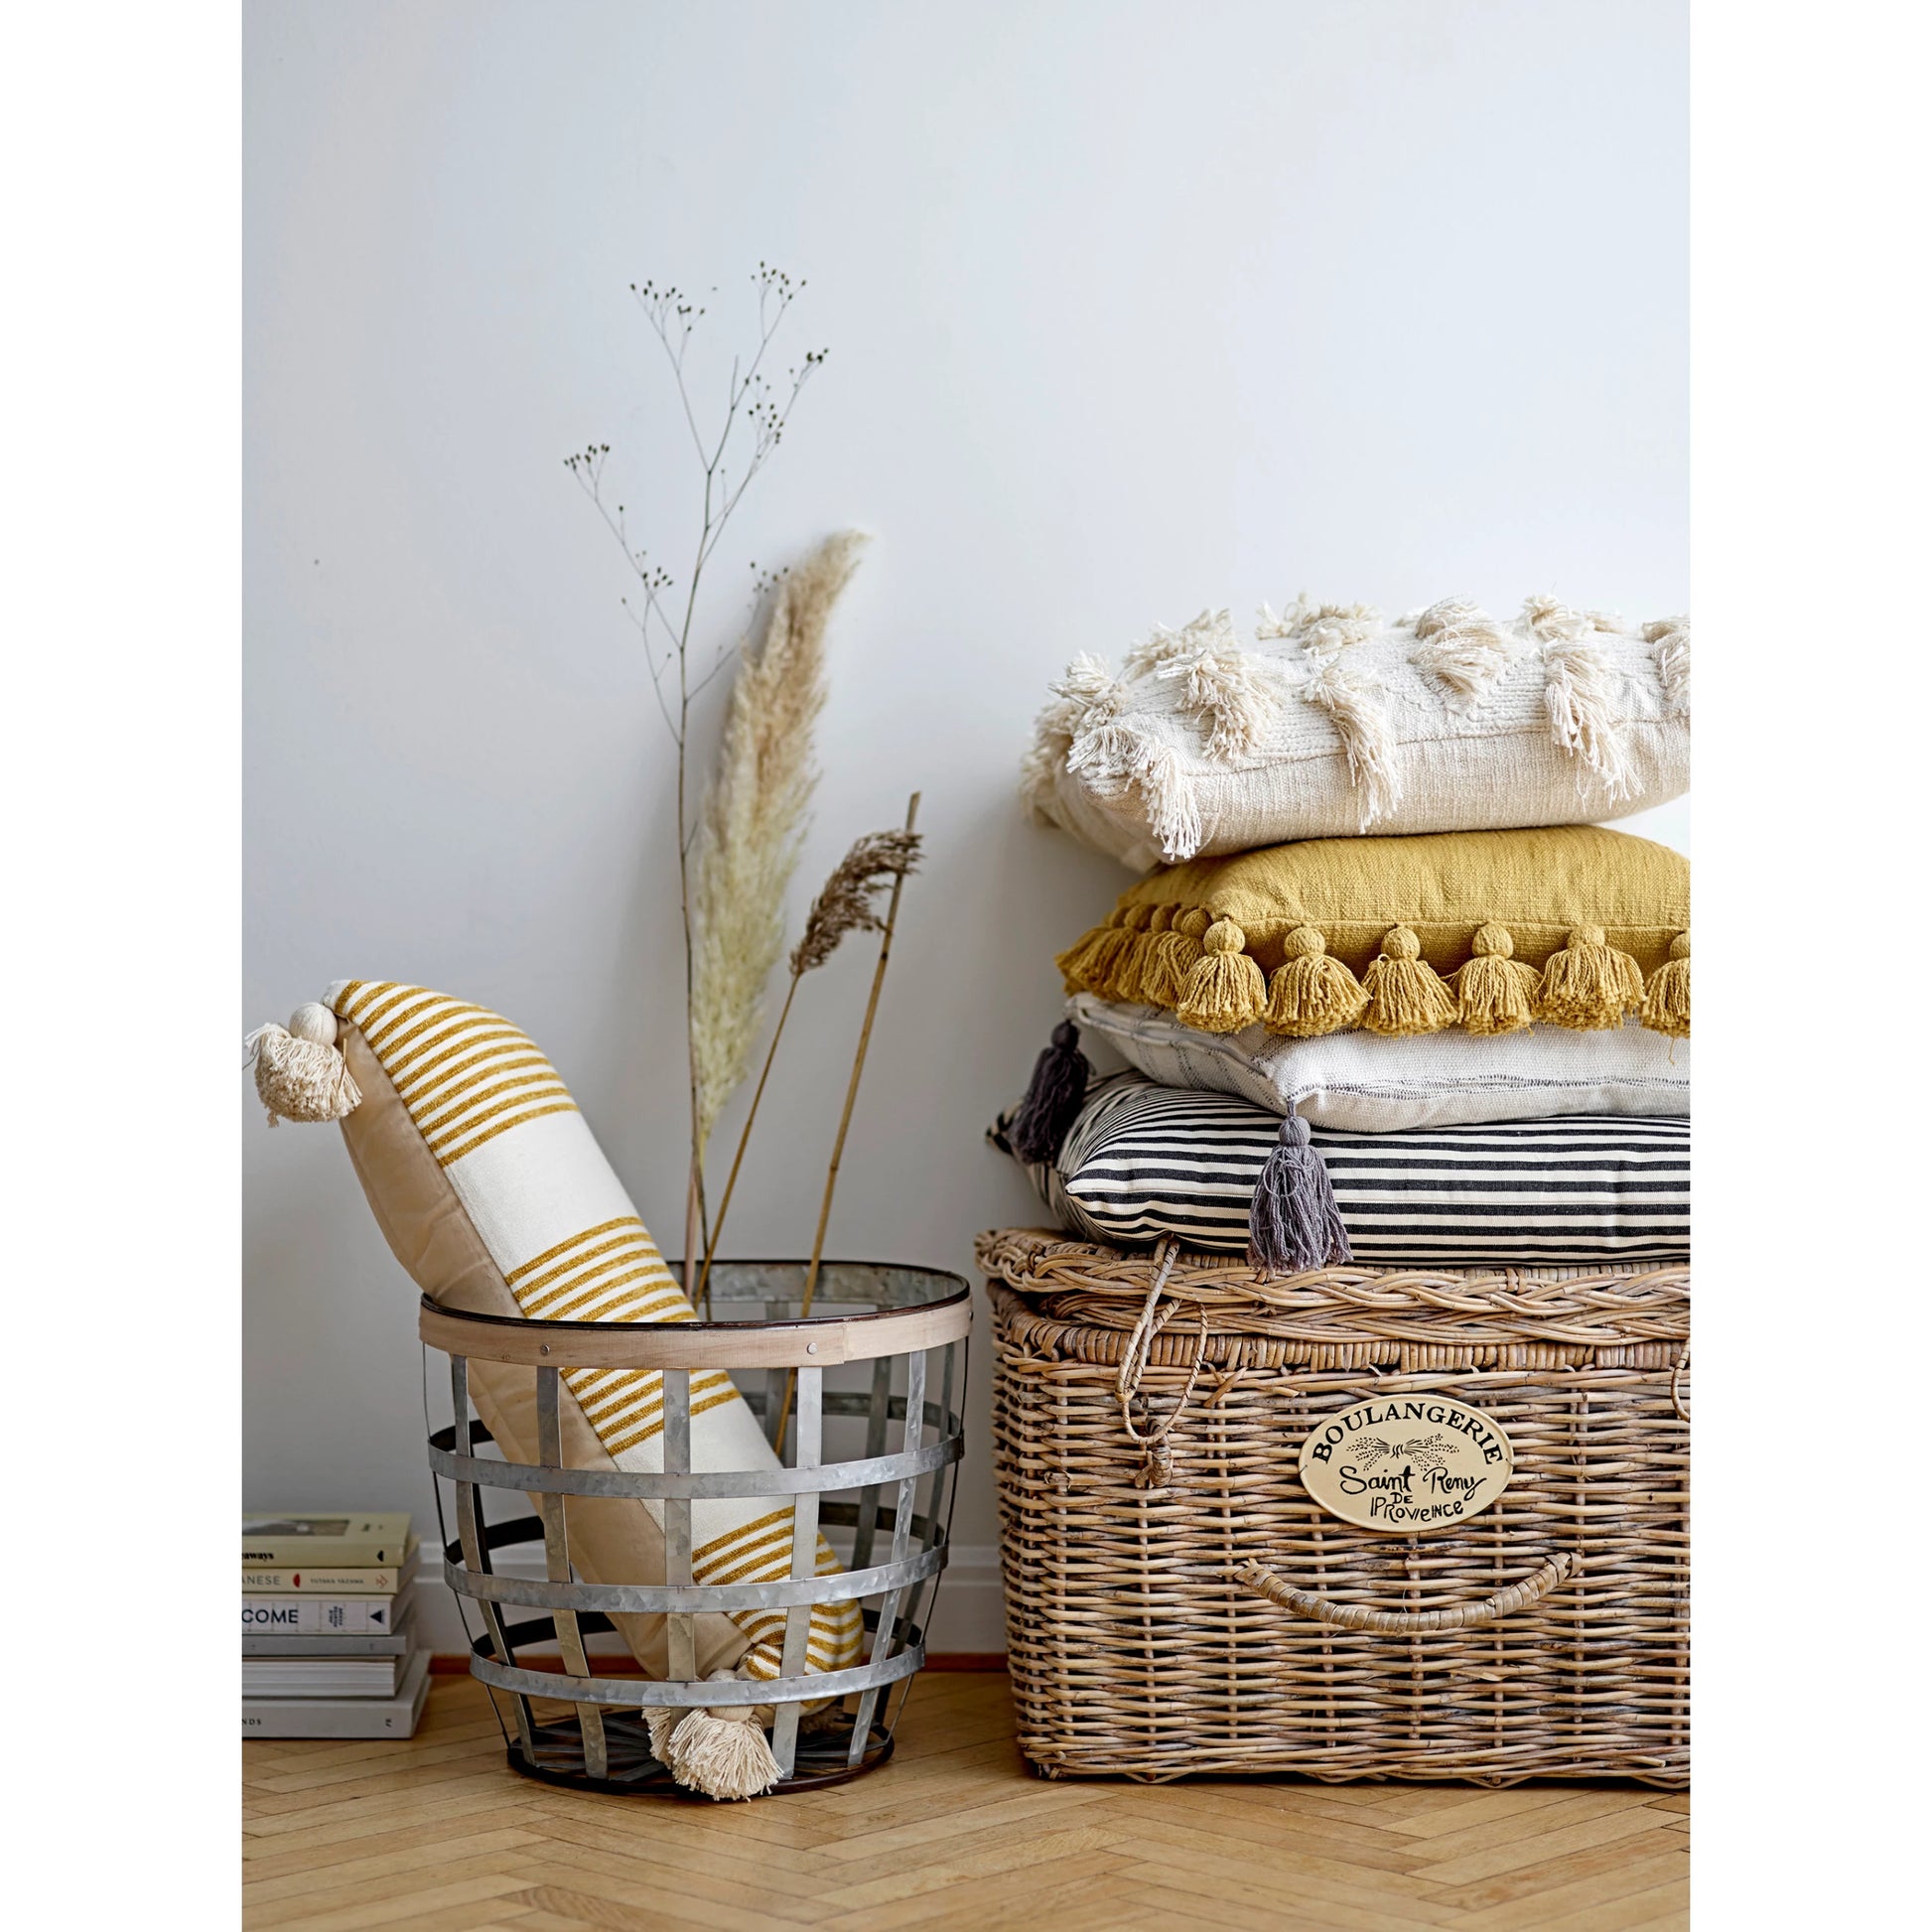 the black and white striped pillow displayed with multiple pillows stacked on a basket next to a metal basket filled with a pillow and decorative picks sitting on the wood floor 